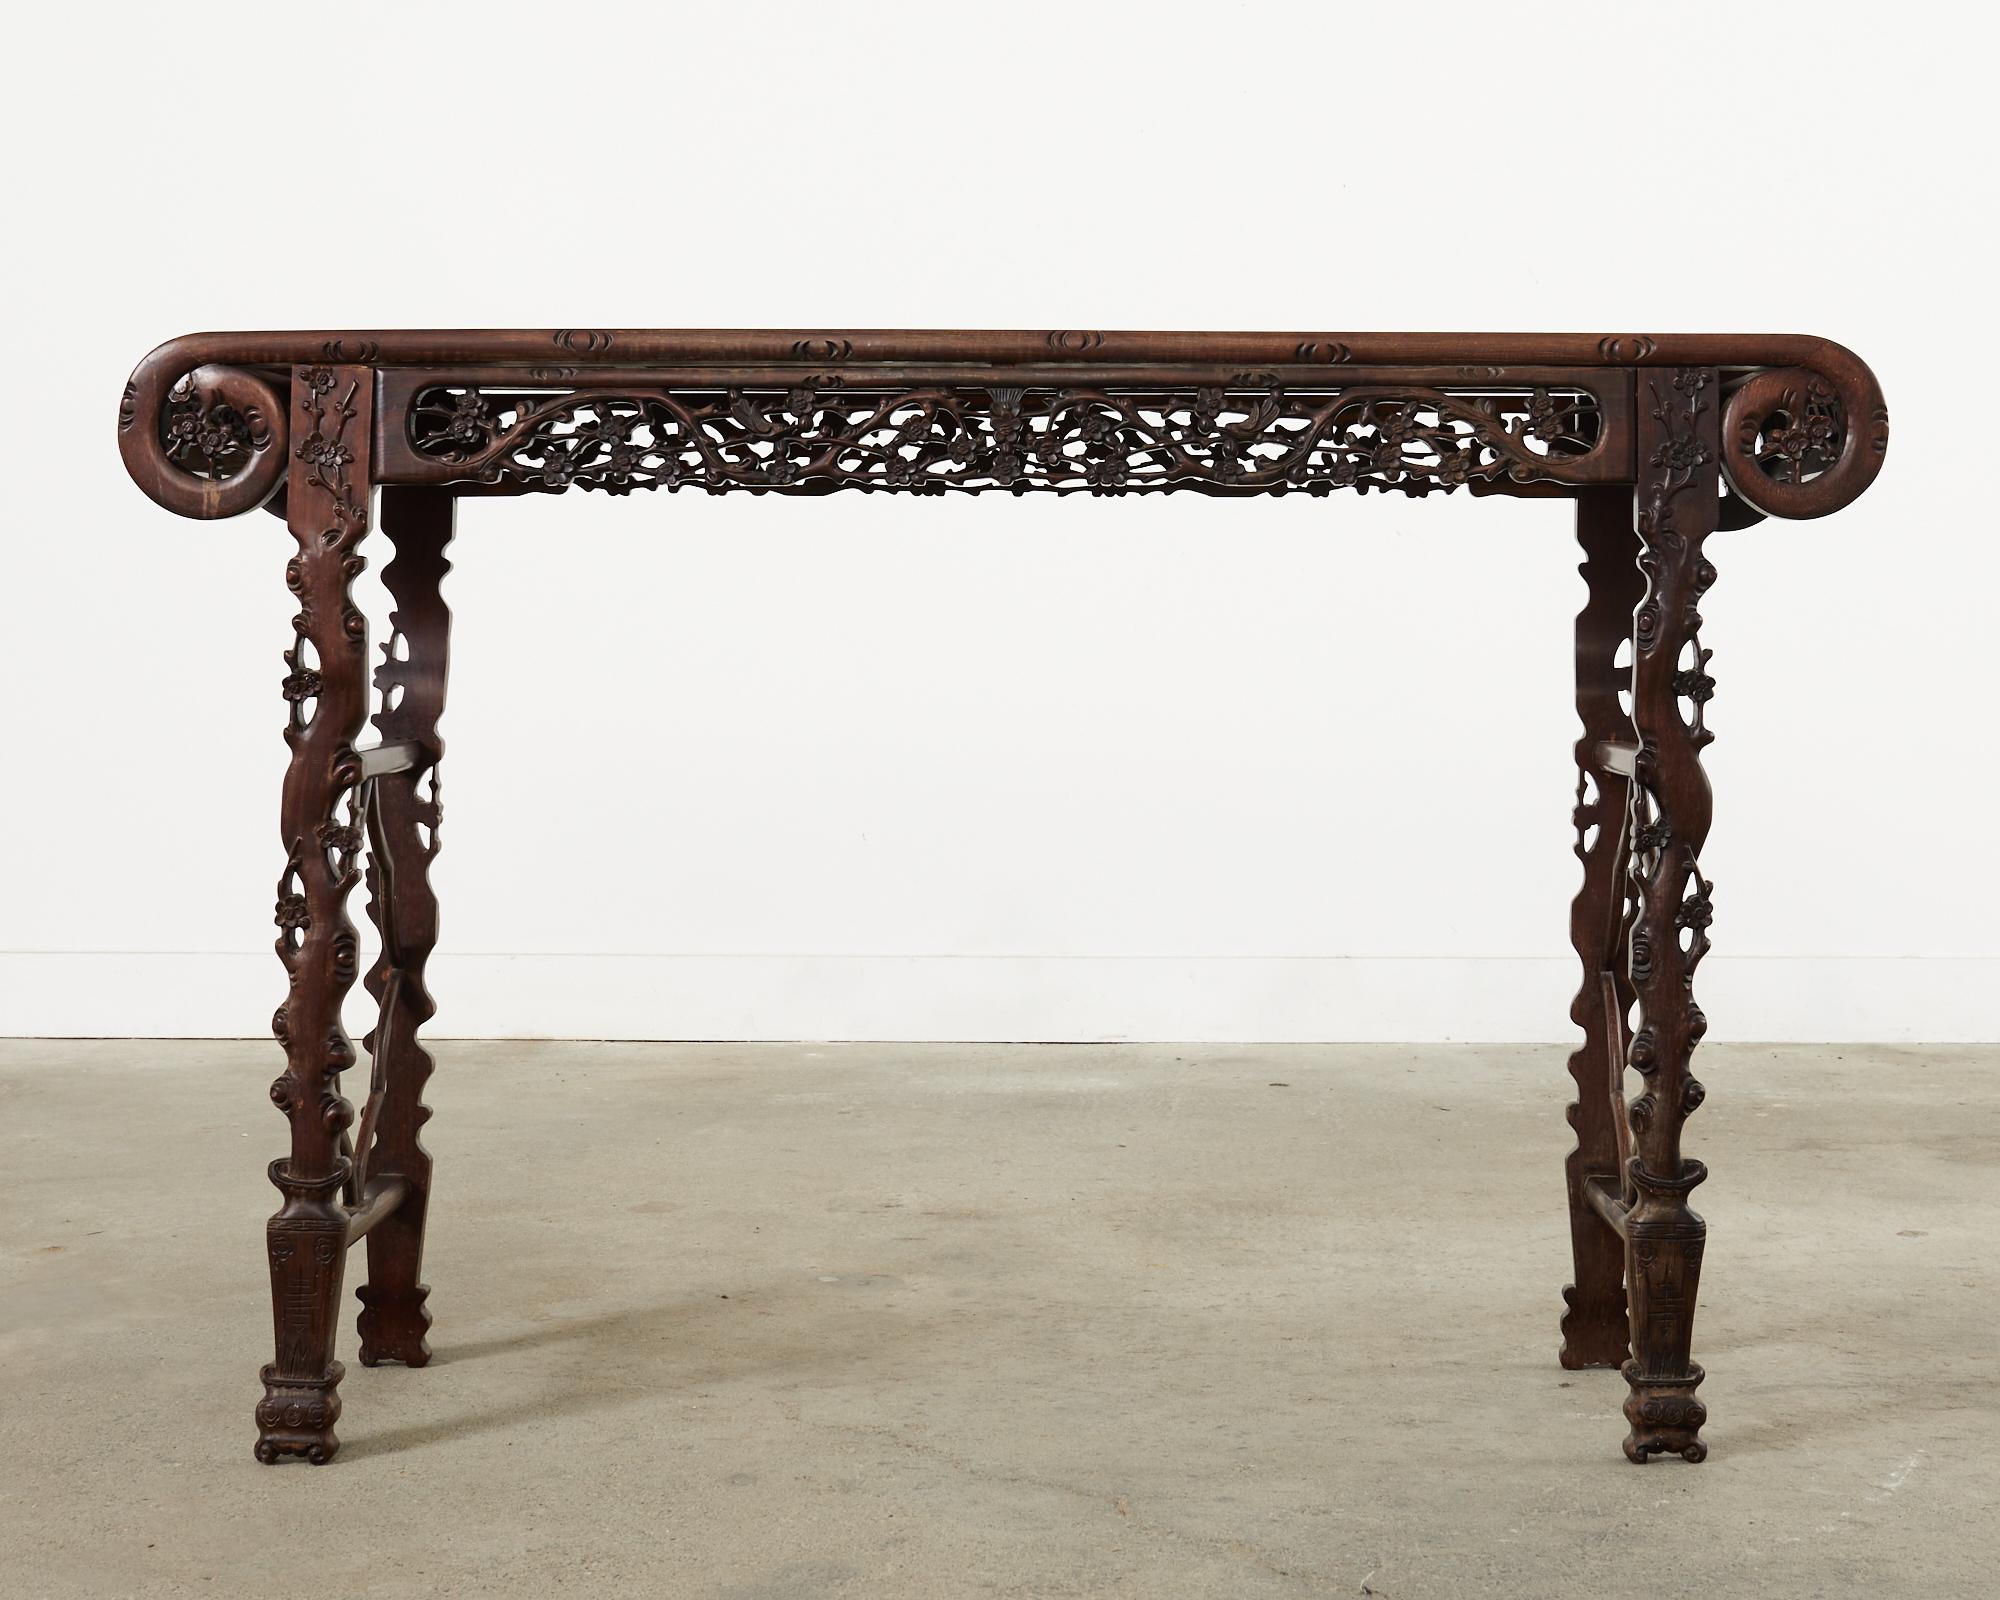 Exceptional Chinese Huali rosewood table with remarkably straight wood grain patterns and distinctive carving. The aprons are carved in an intricate lattice work of blossoms and birds. The legs feature delicate faux bois and prunus blossoms. From